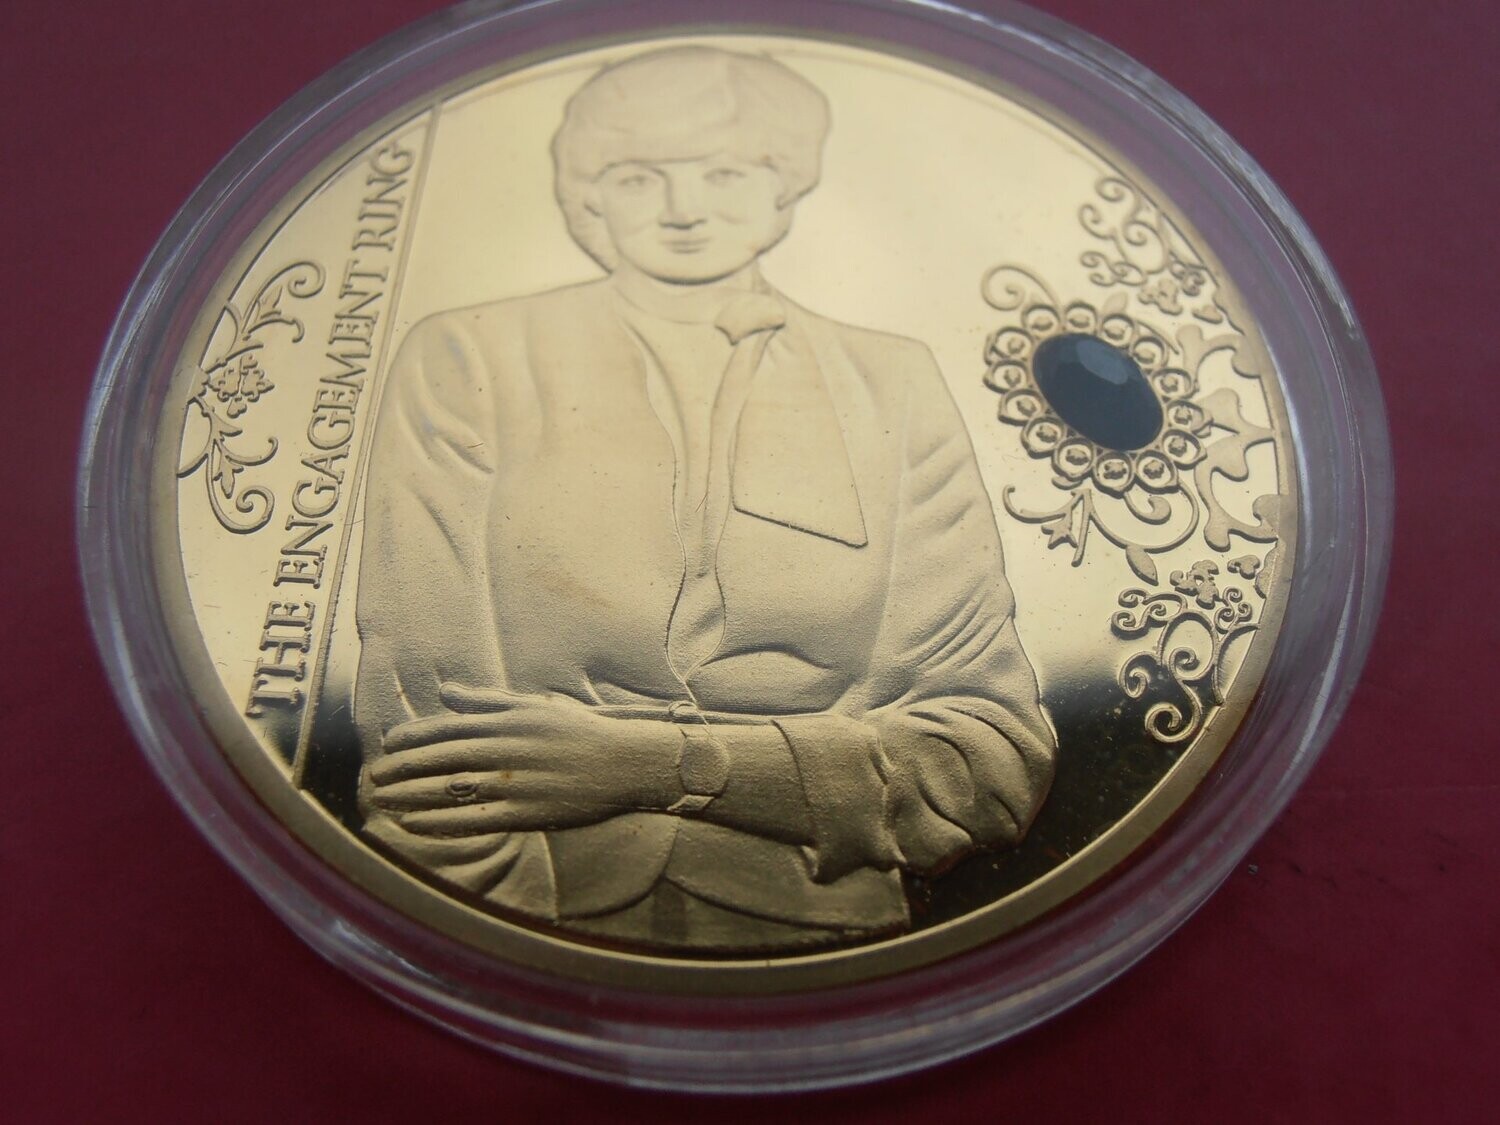 Diana Her Life in Jewels Medal - 2012